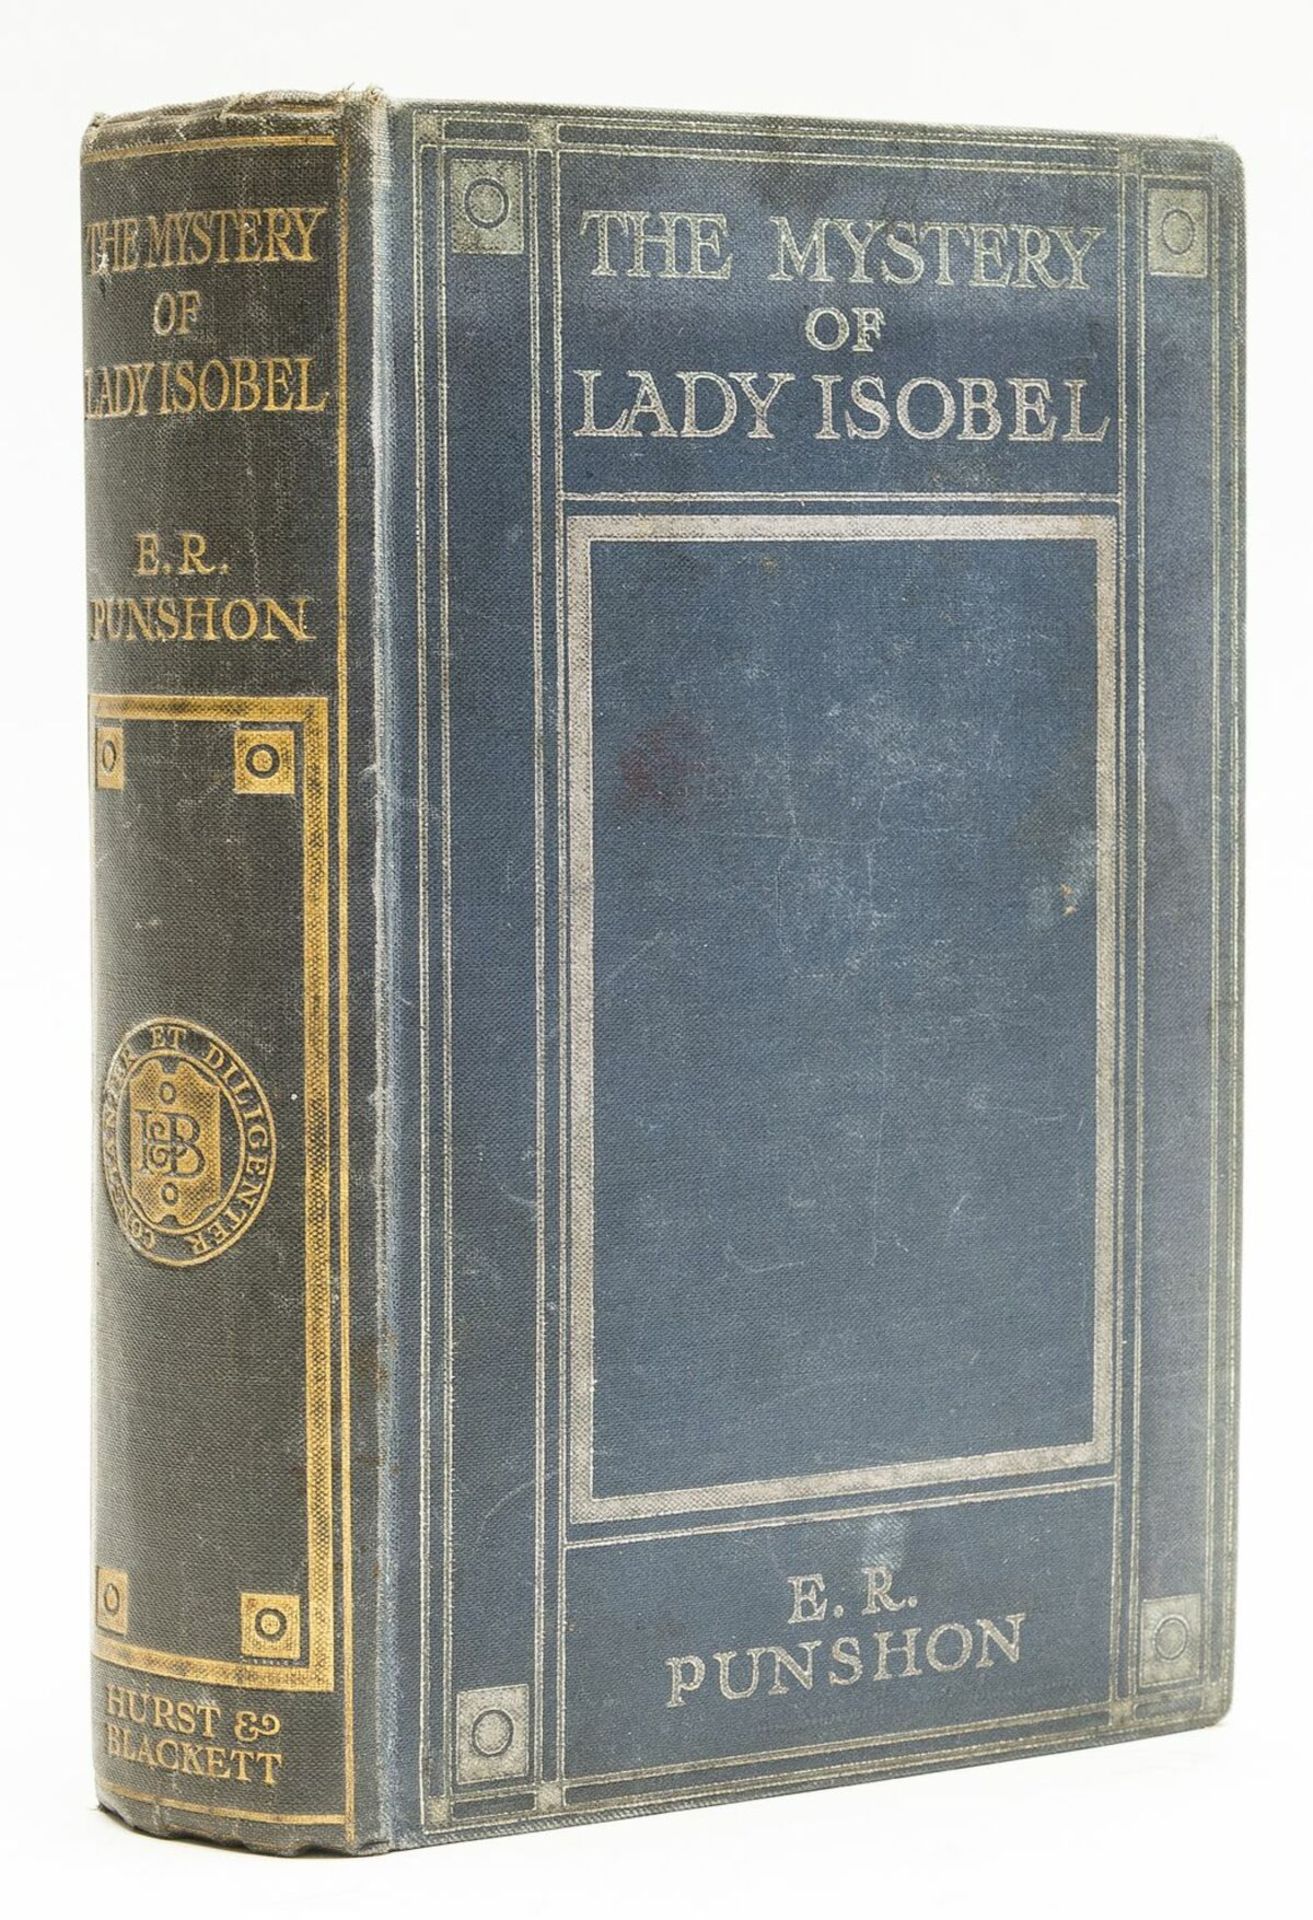 Punshon (E. R.) The Mystery of Lady Isobel, first edition, 1907.